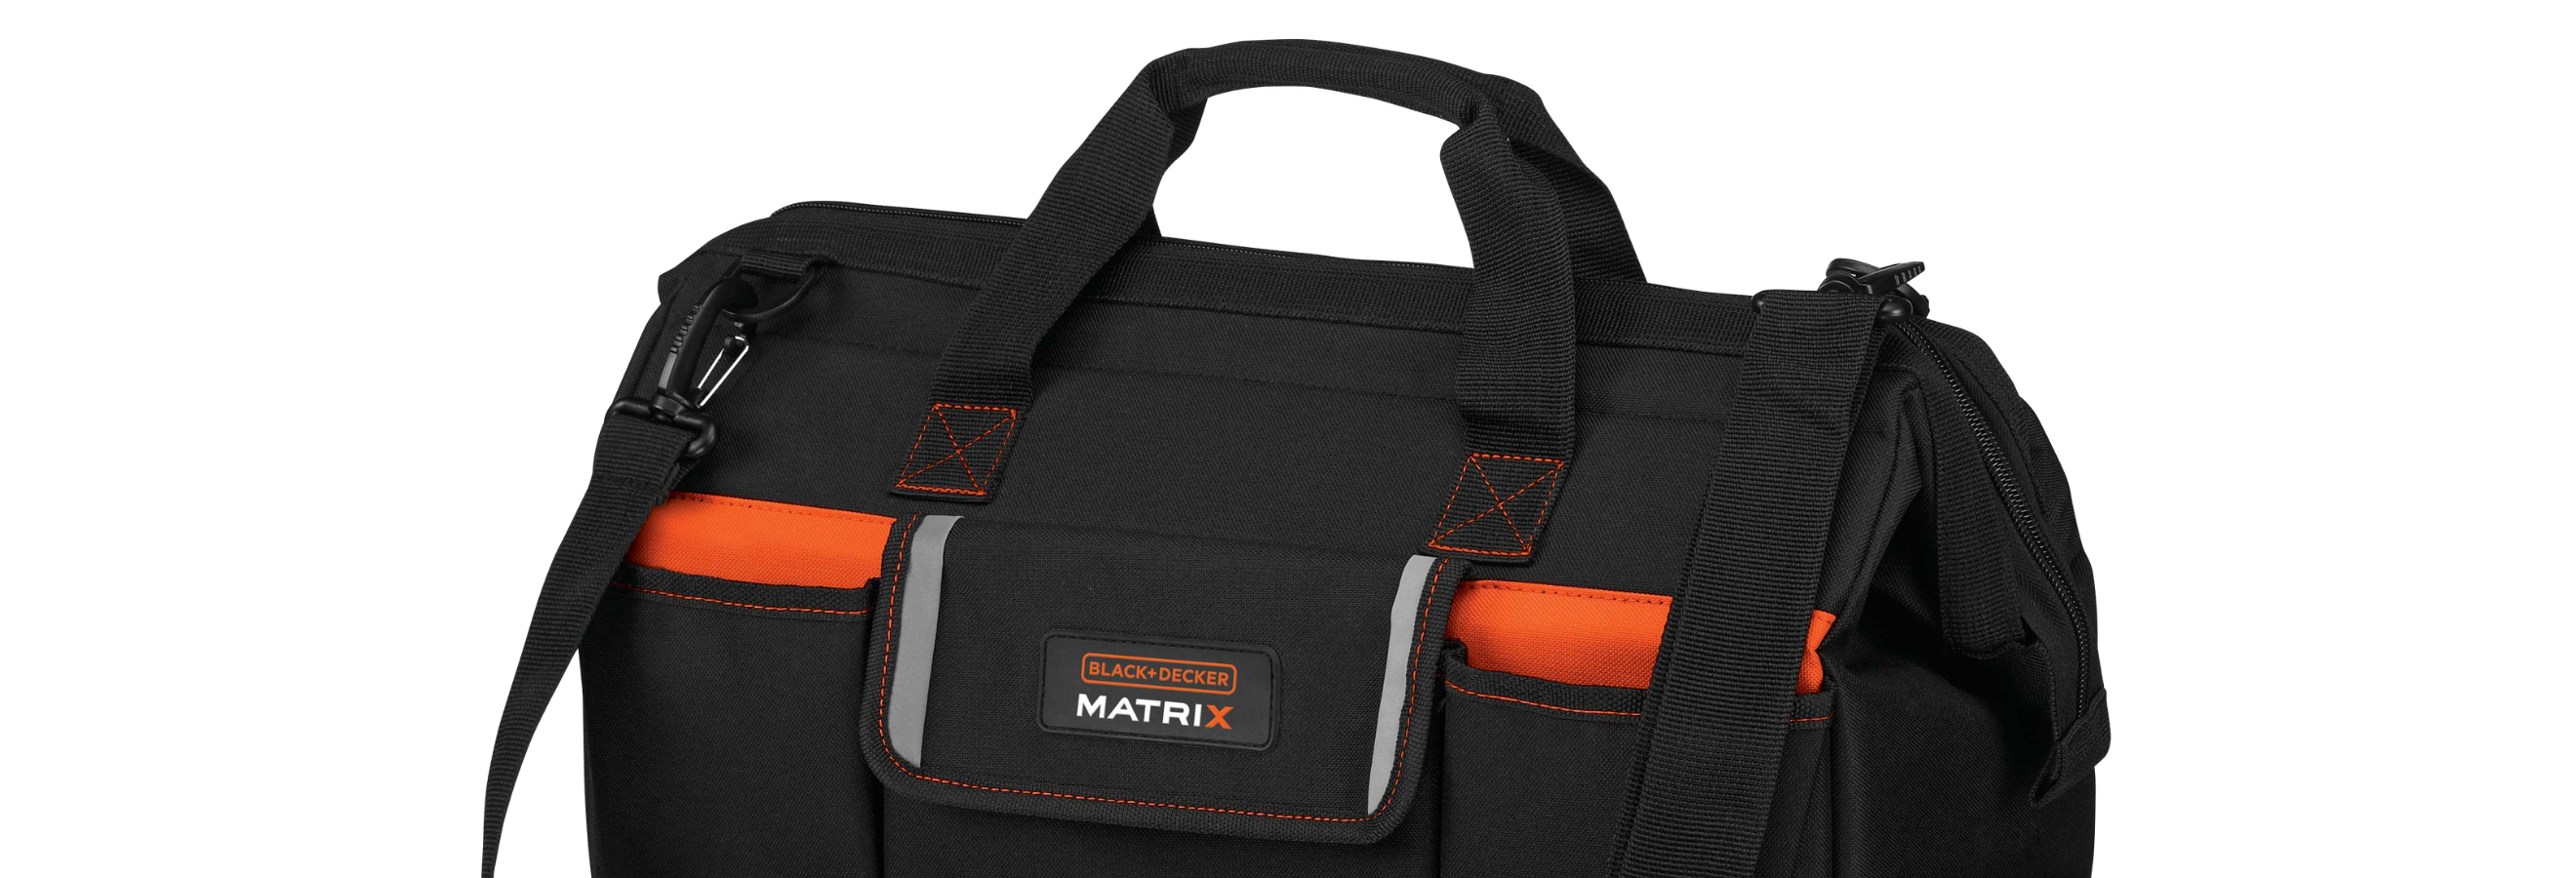 Tool Tote Bag For Matrix System, Wide-Mouth, 21-Inch